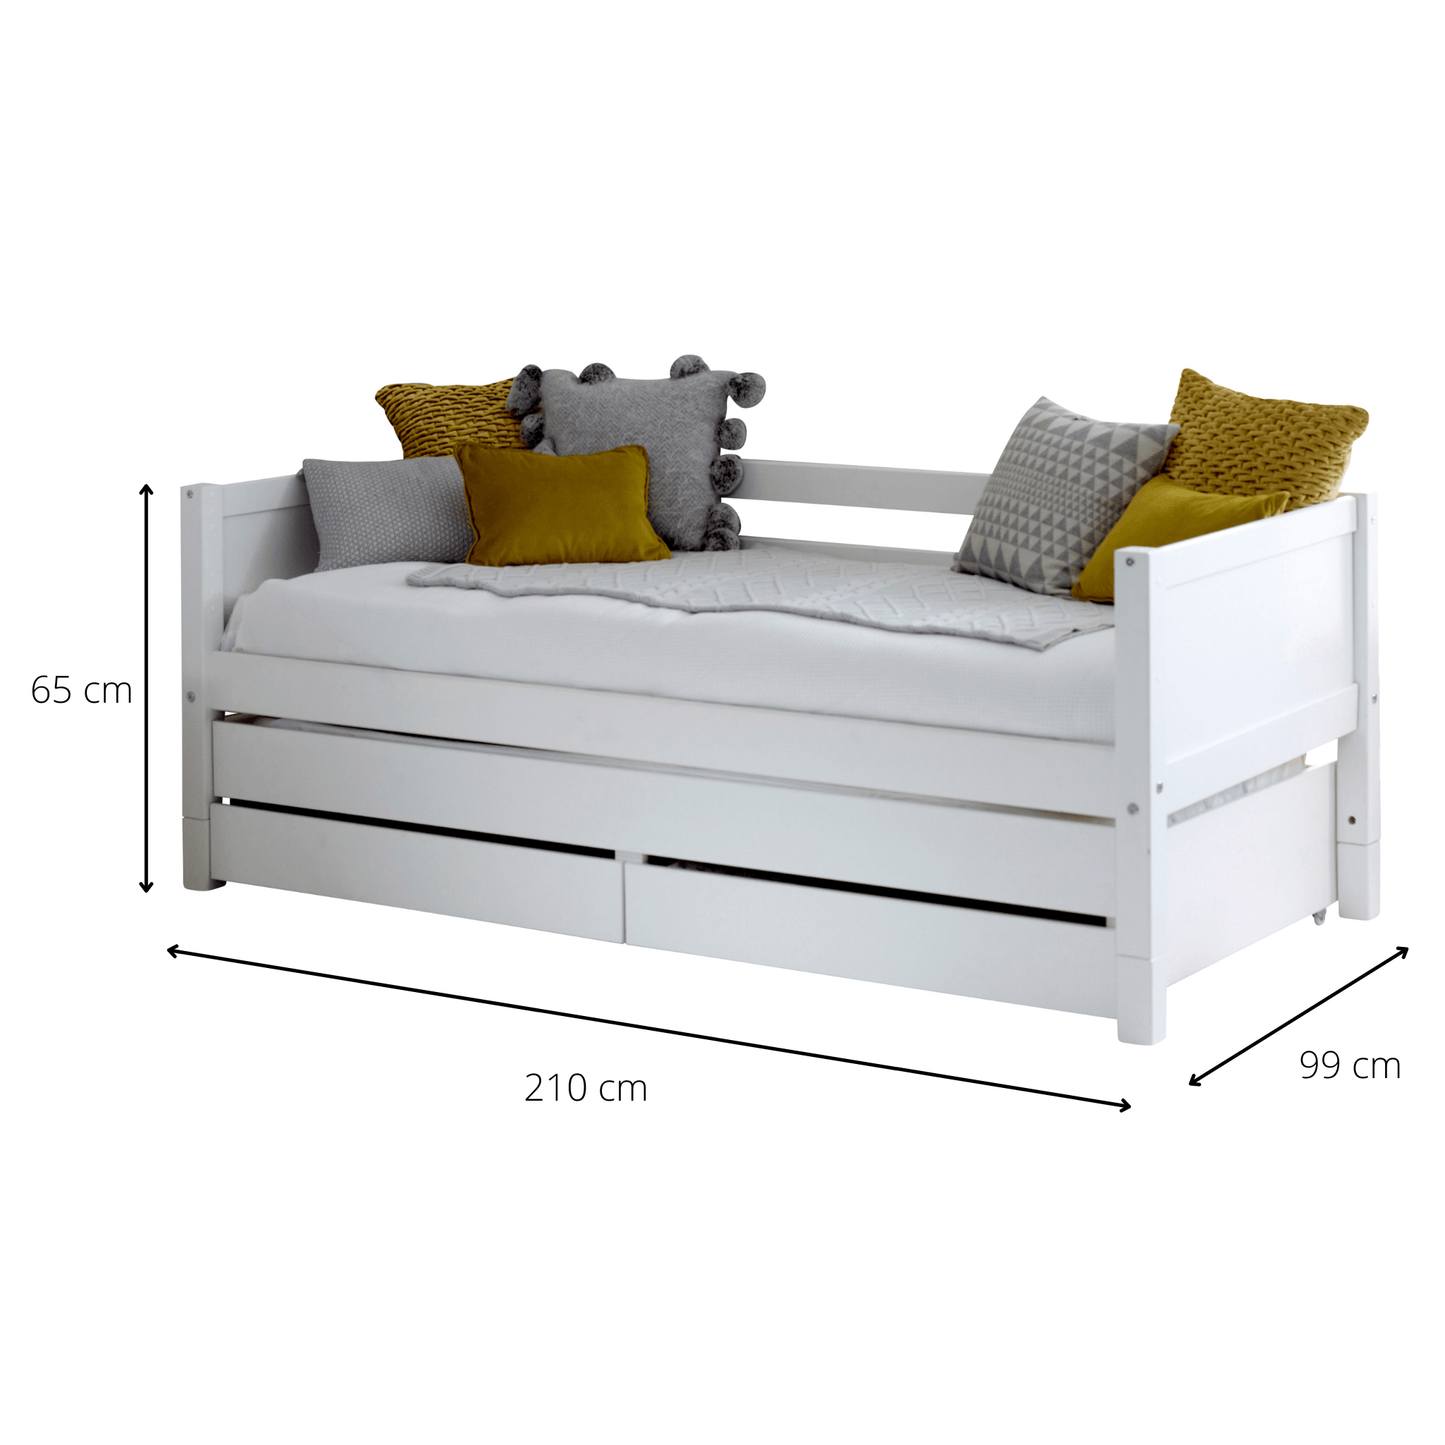 Kristina Nordic Daybed with Dimensions